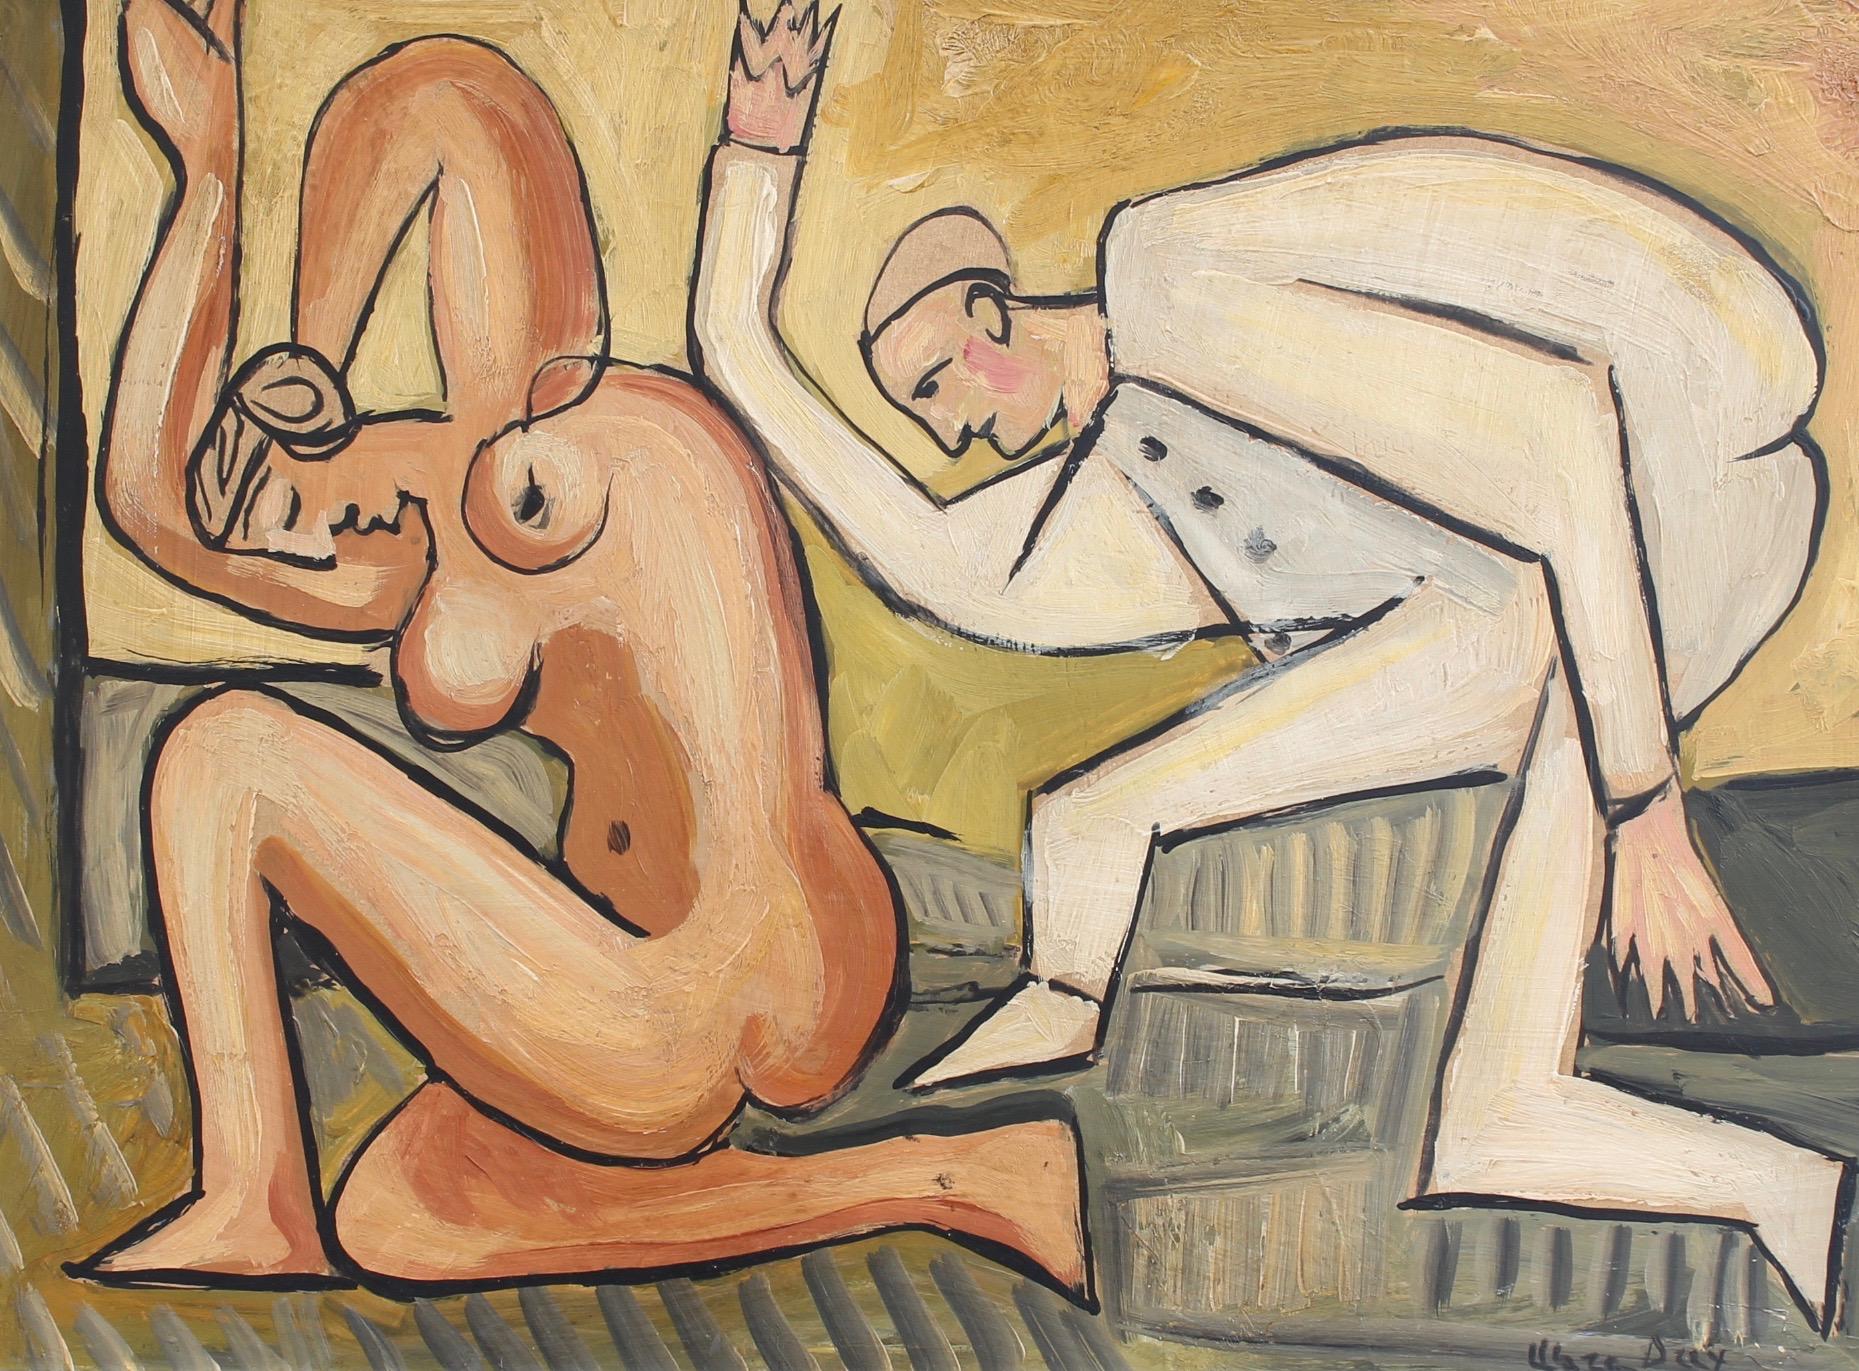 Unknown Abstract Painting - 'Kneeling Nude and Mysterious Figure', Berlin School after Picasso